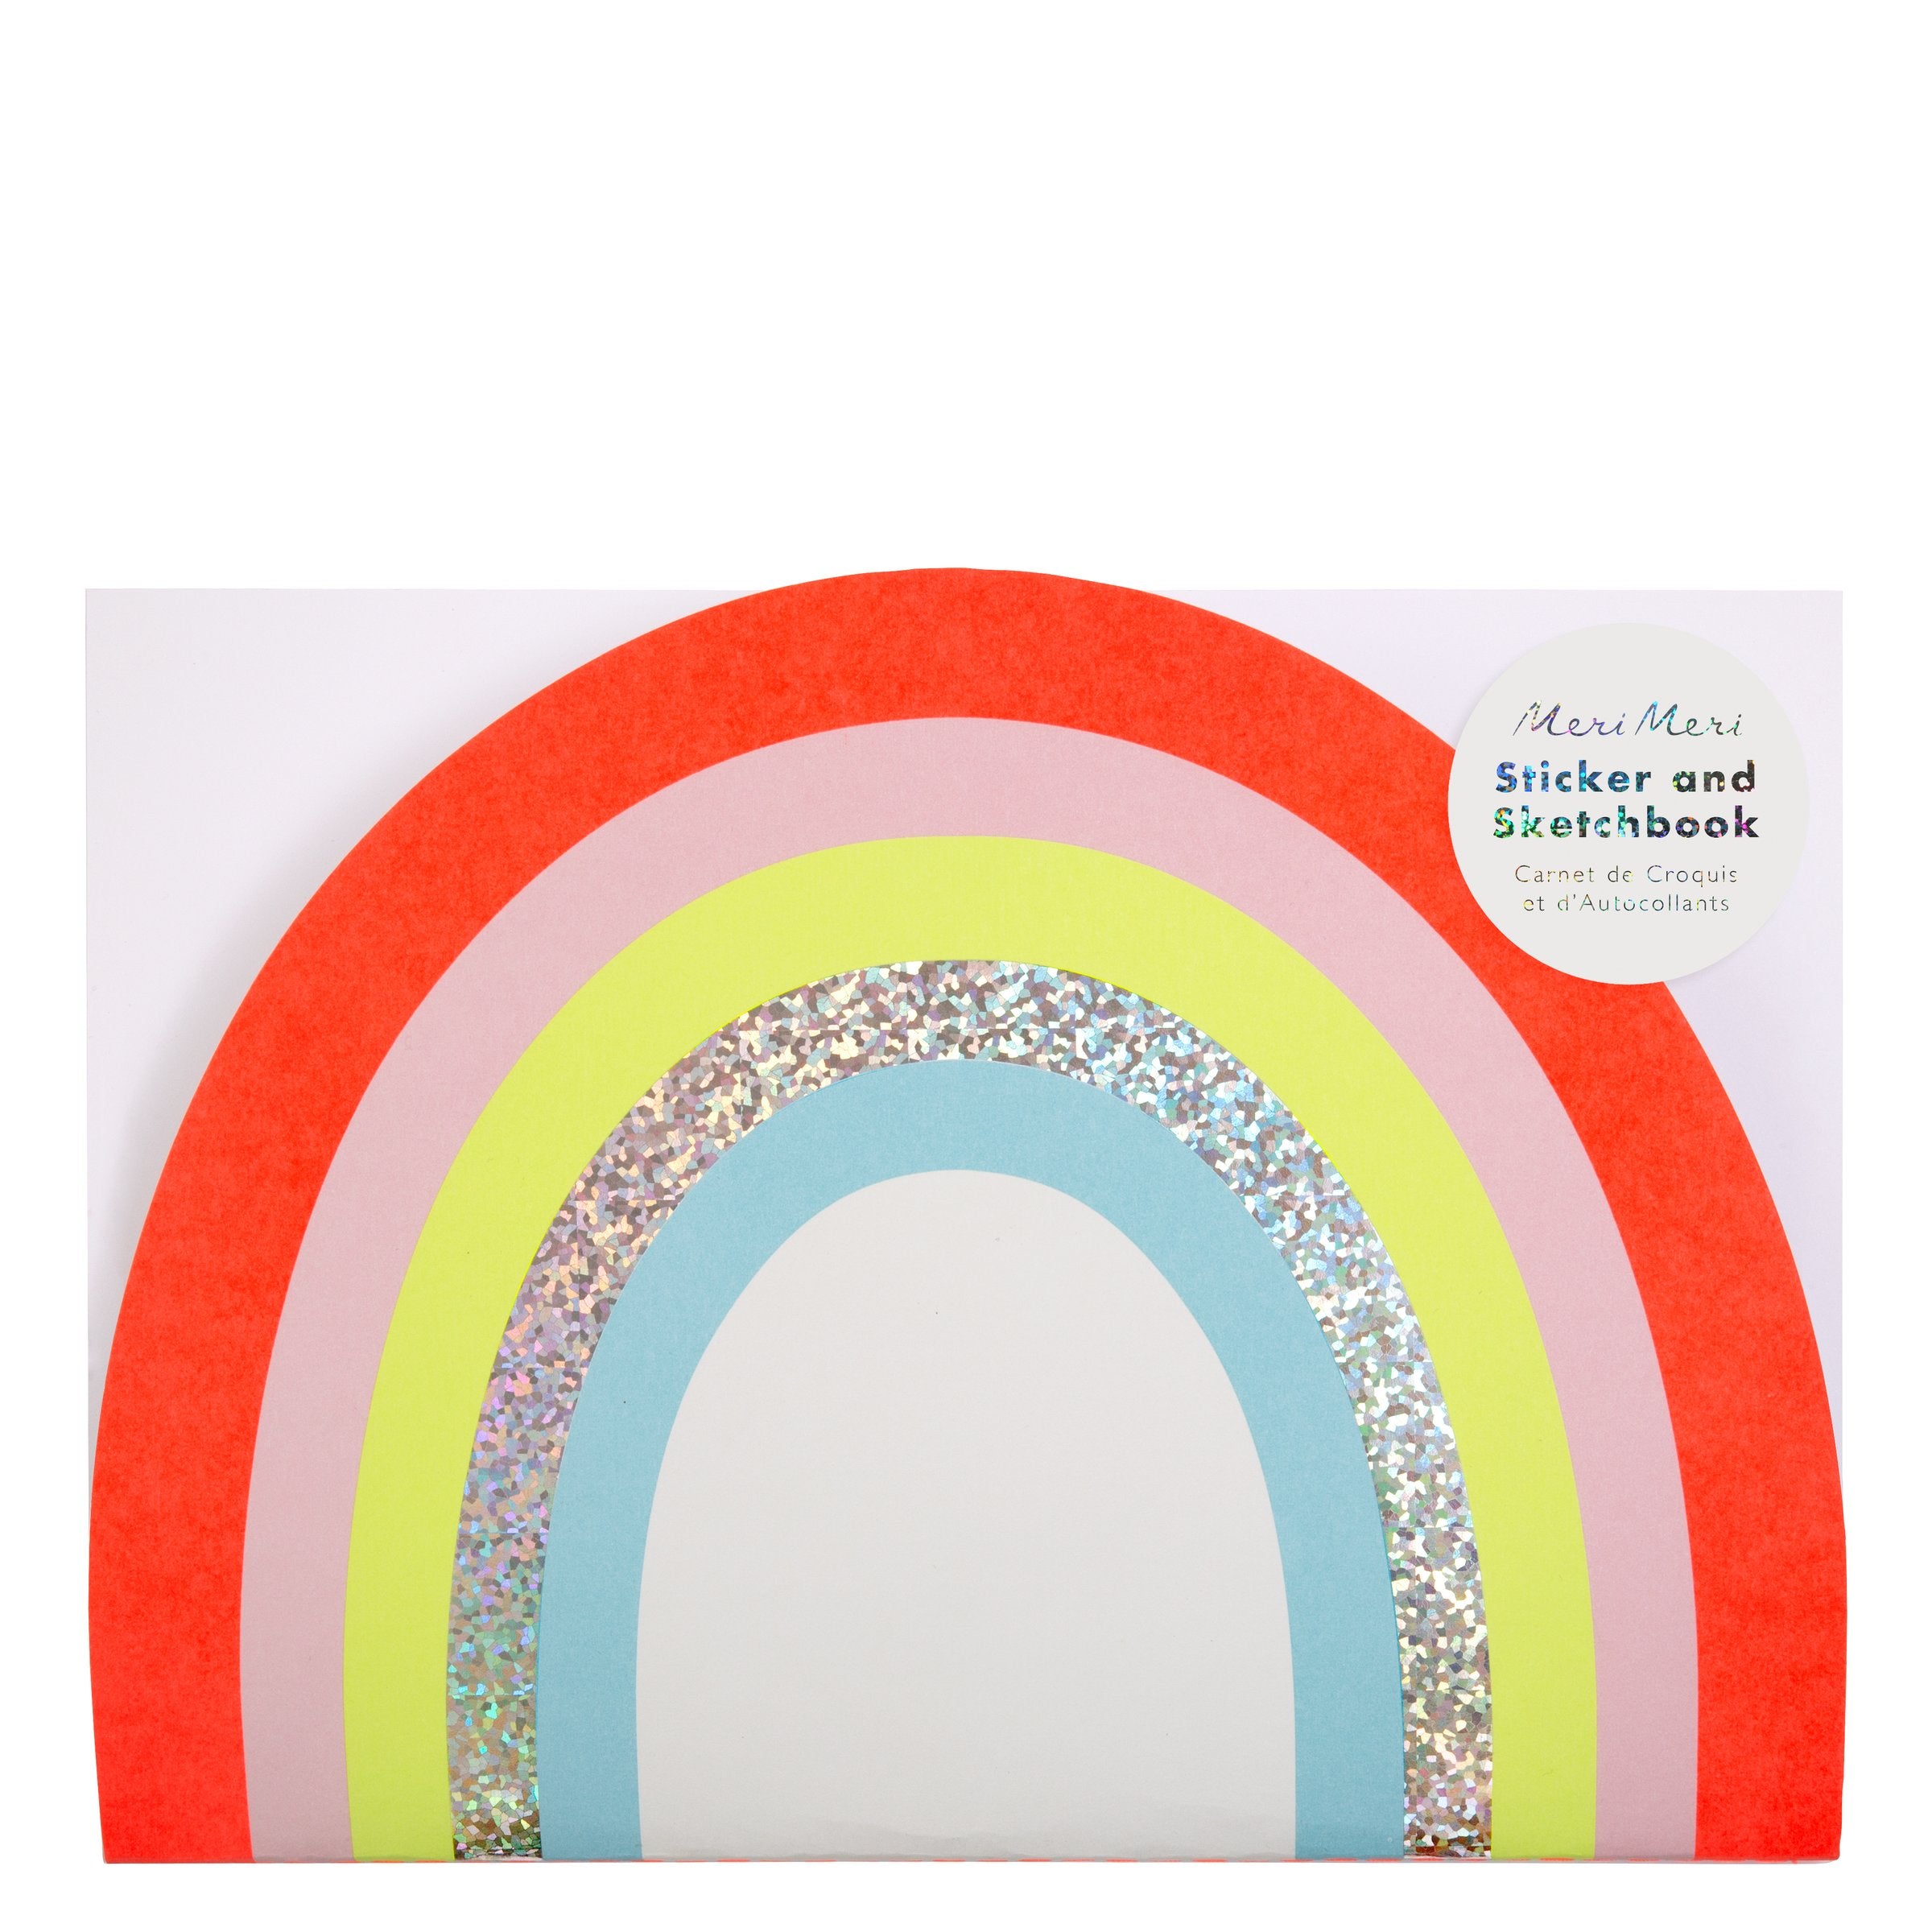 It features 32 sketch pages and 6 pages of rainbow, holographic and alphabet stickers.